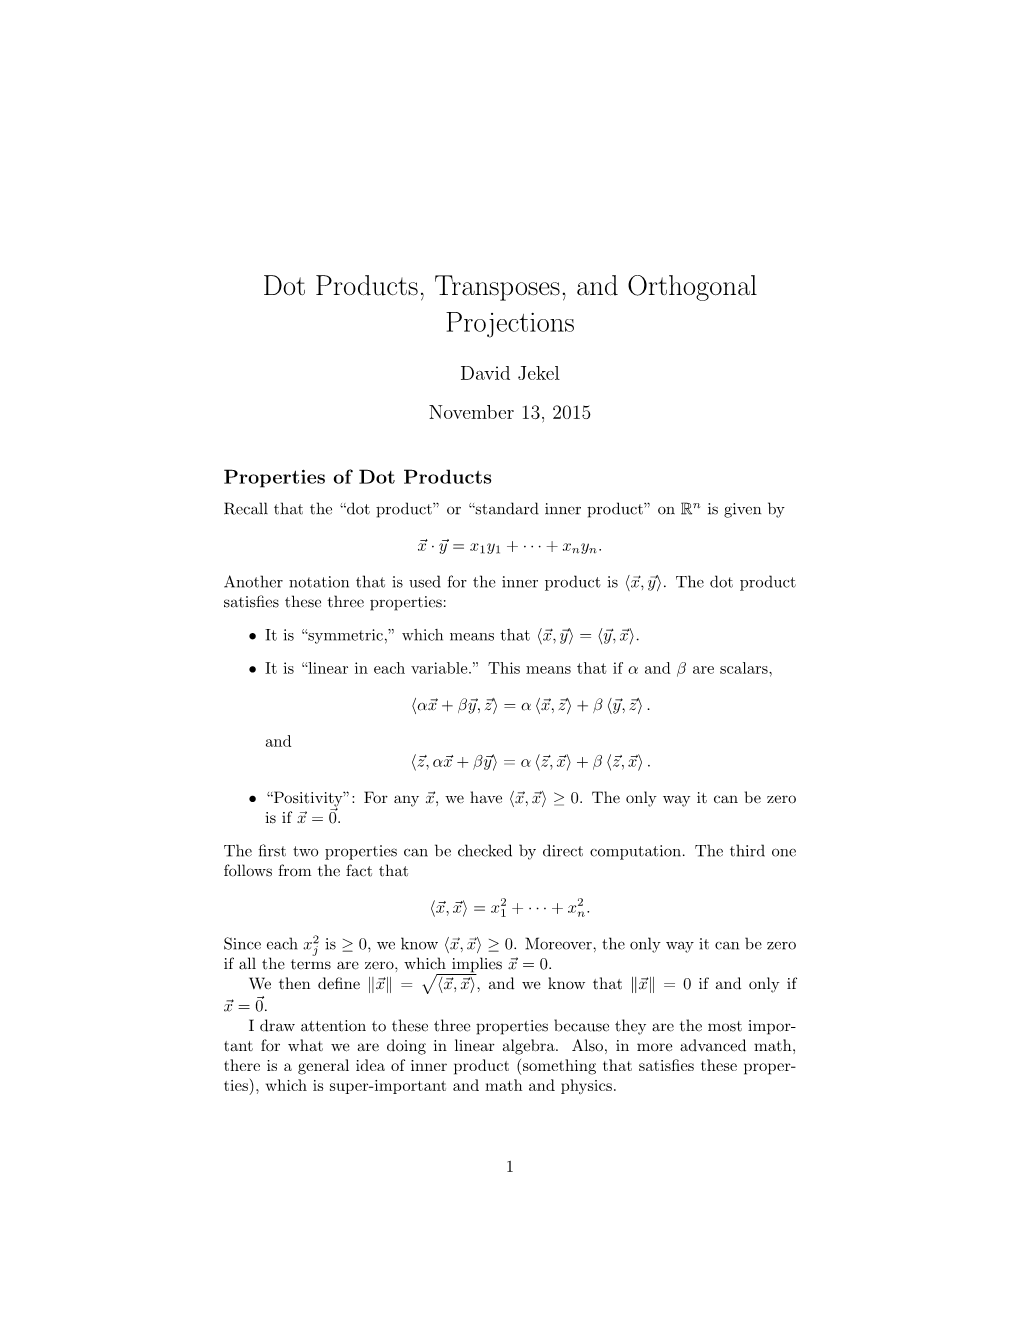 Dot Products, Transposes, and Orthogonal Projections